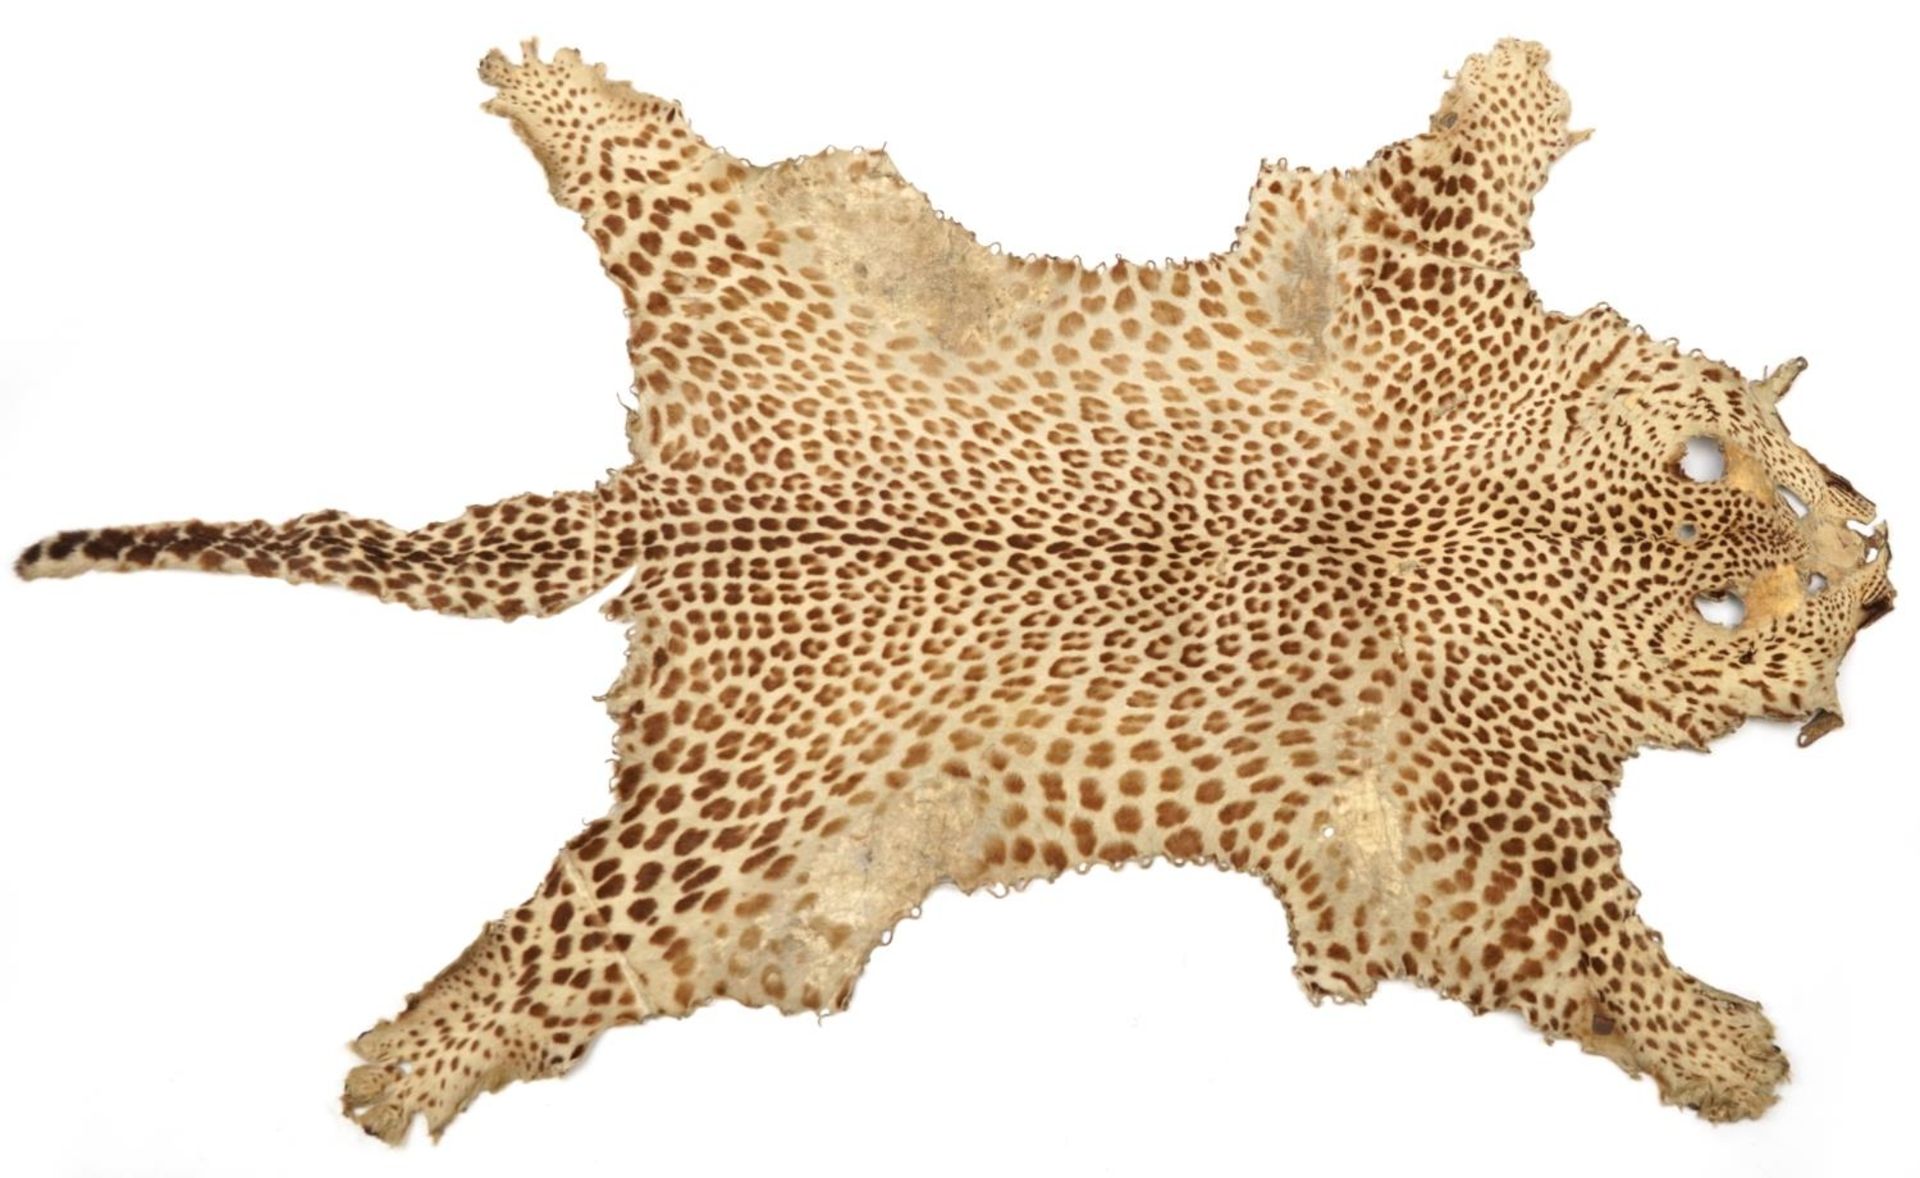 Early 20th century taxidermy interest leopard skin, 220cm in length